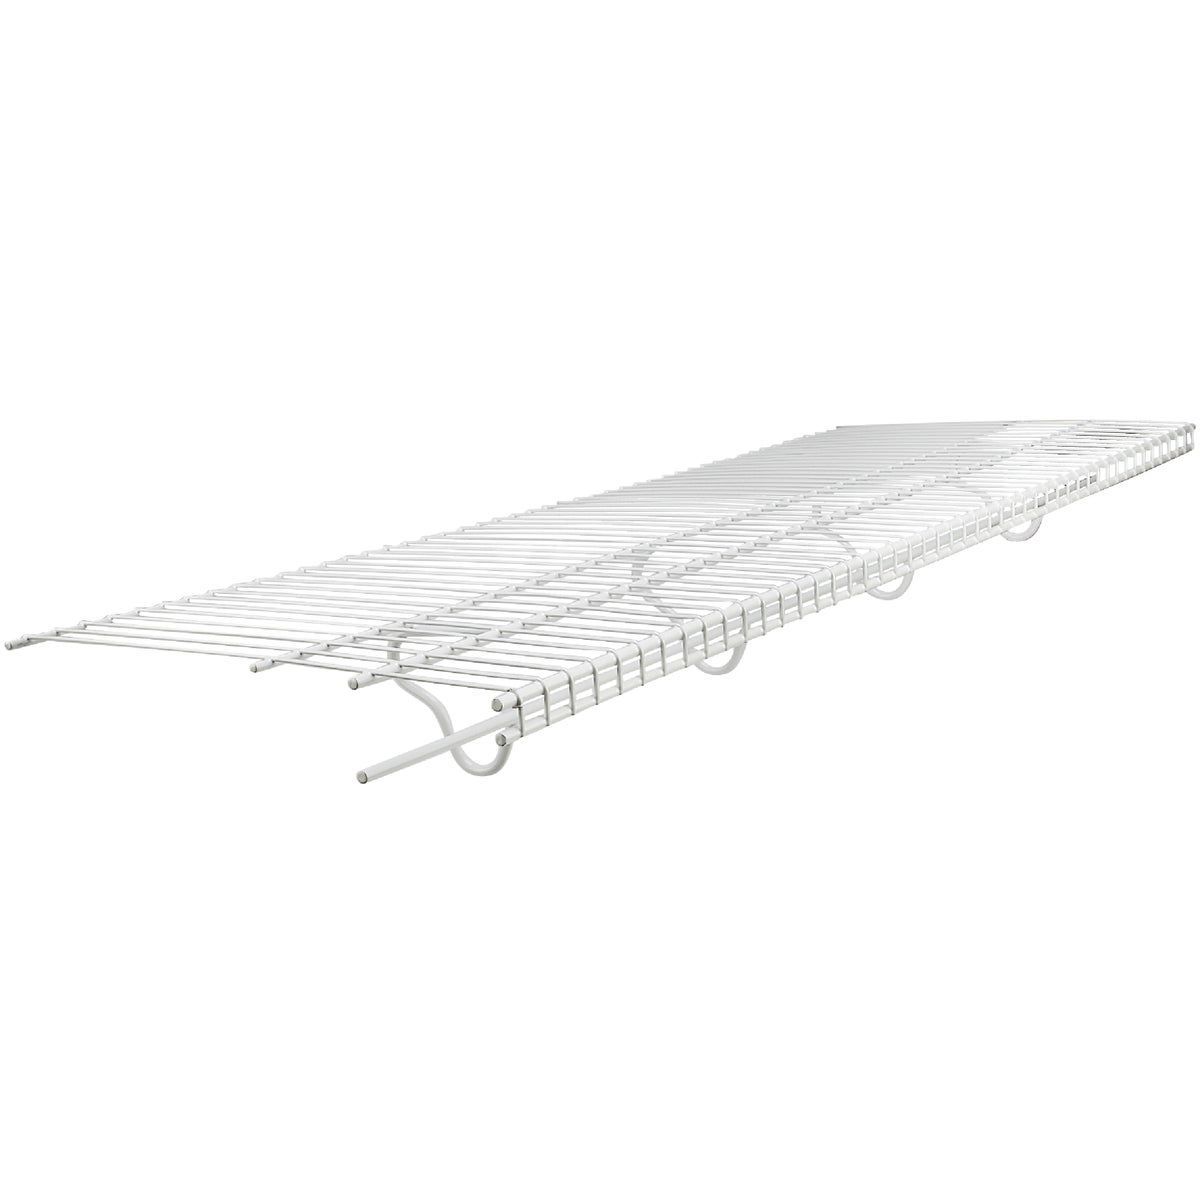 ClosetMaid TotalSlide 12 Ft. W. x 16 In. D. Ventilated Wire Shelf & Rod,  White